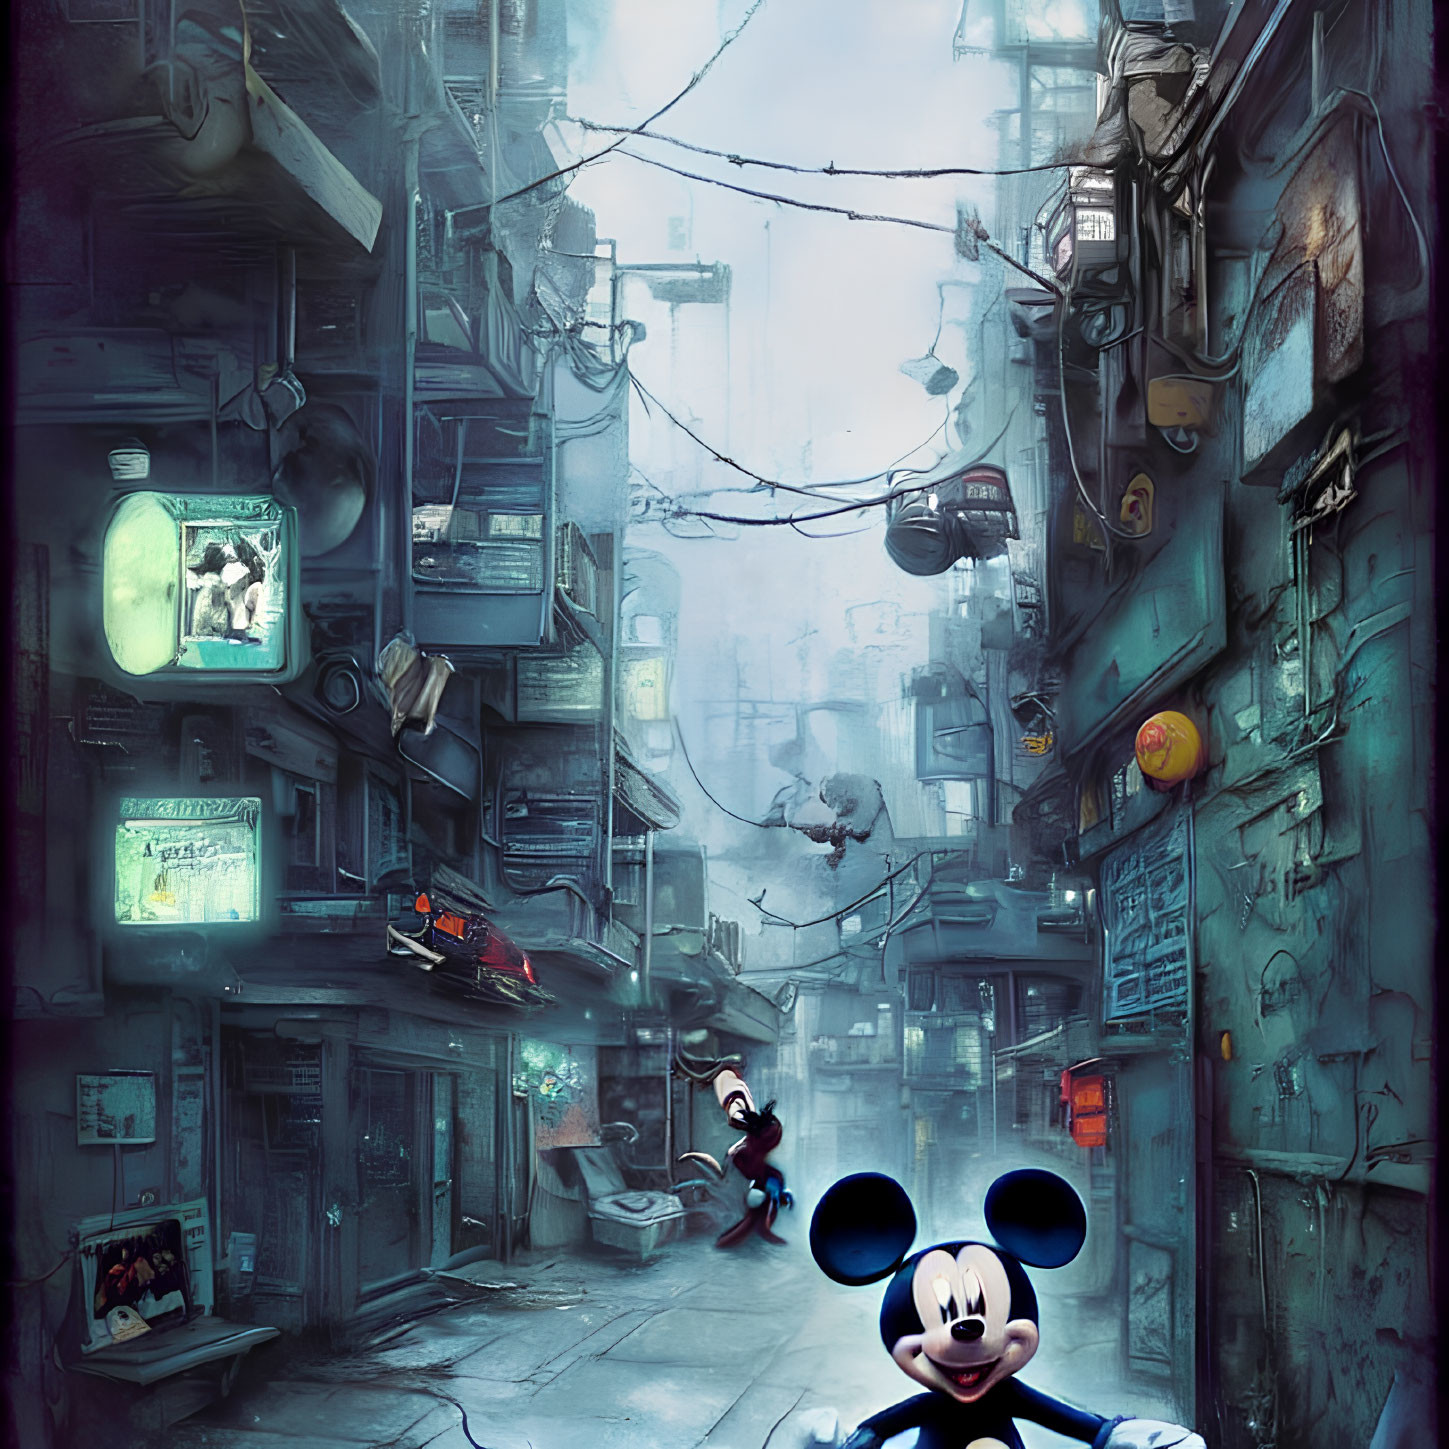 Futuristic urban alley with neon signs and stylized Mickey Mouse